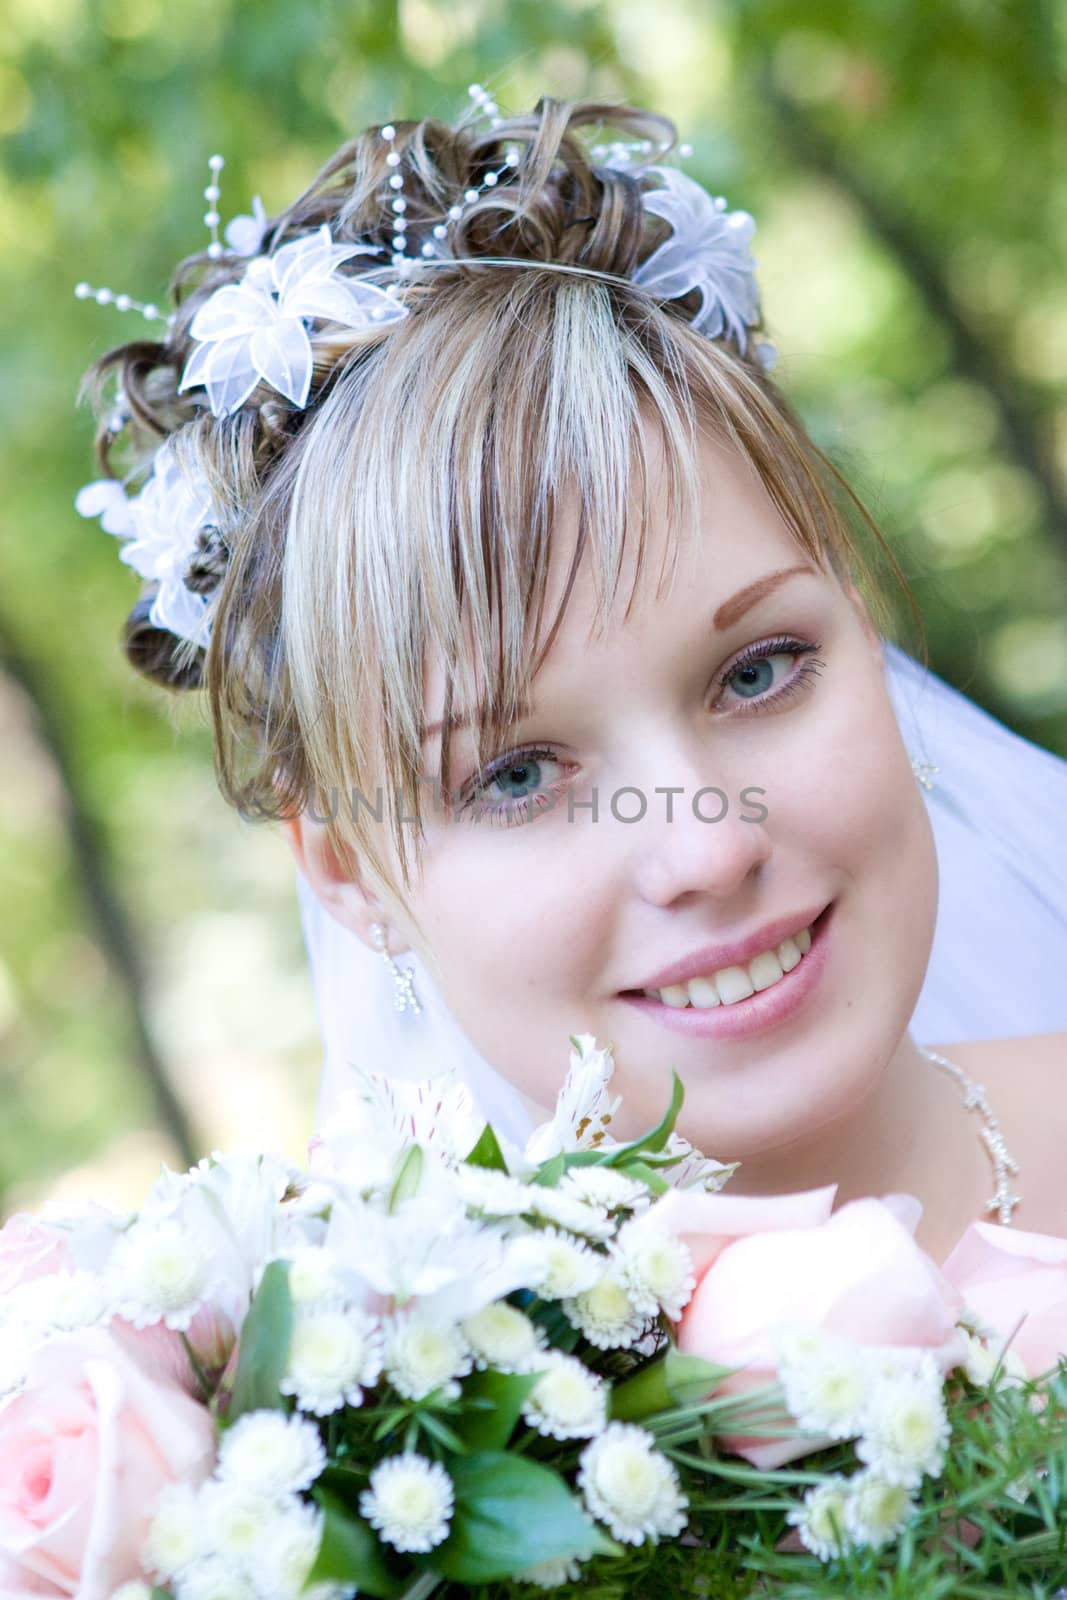 bride with a flower bouquet by the tree by vsurkov